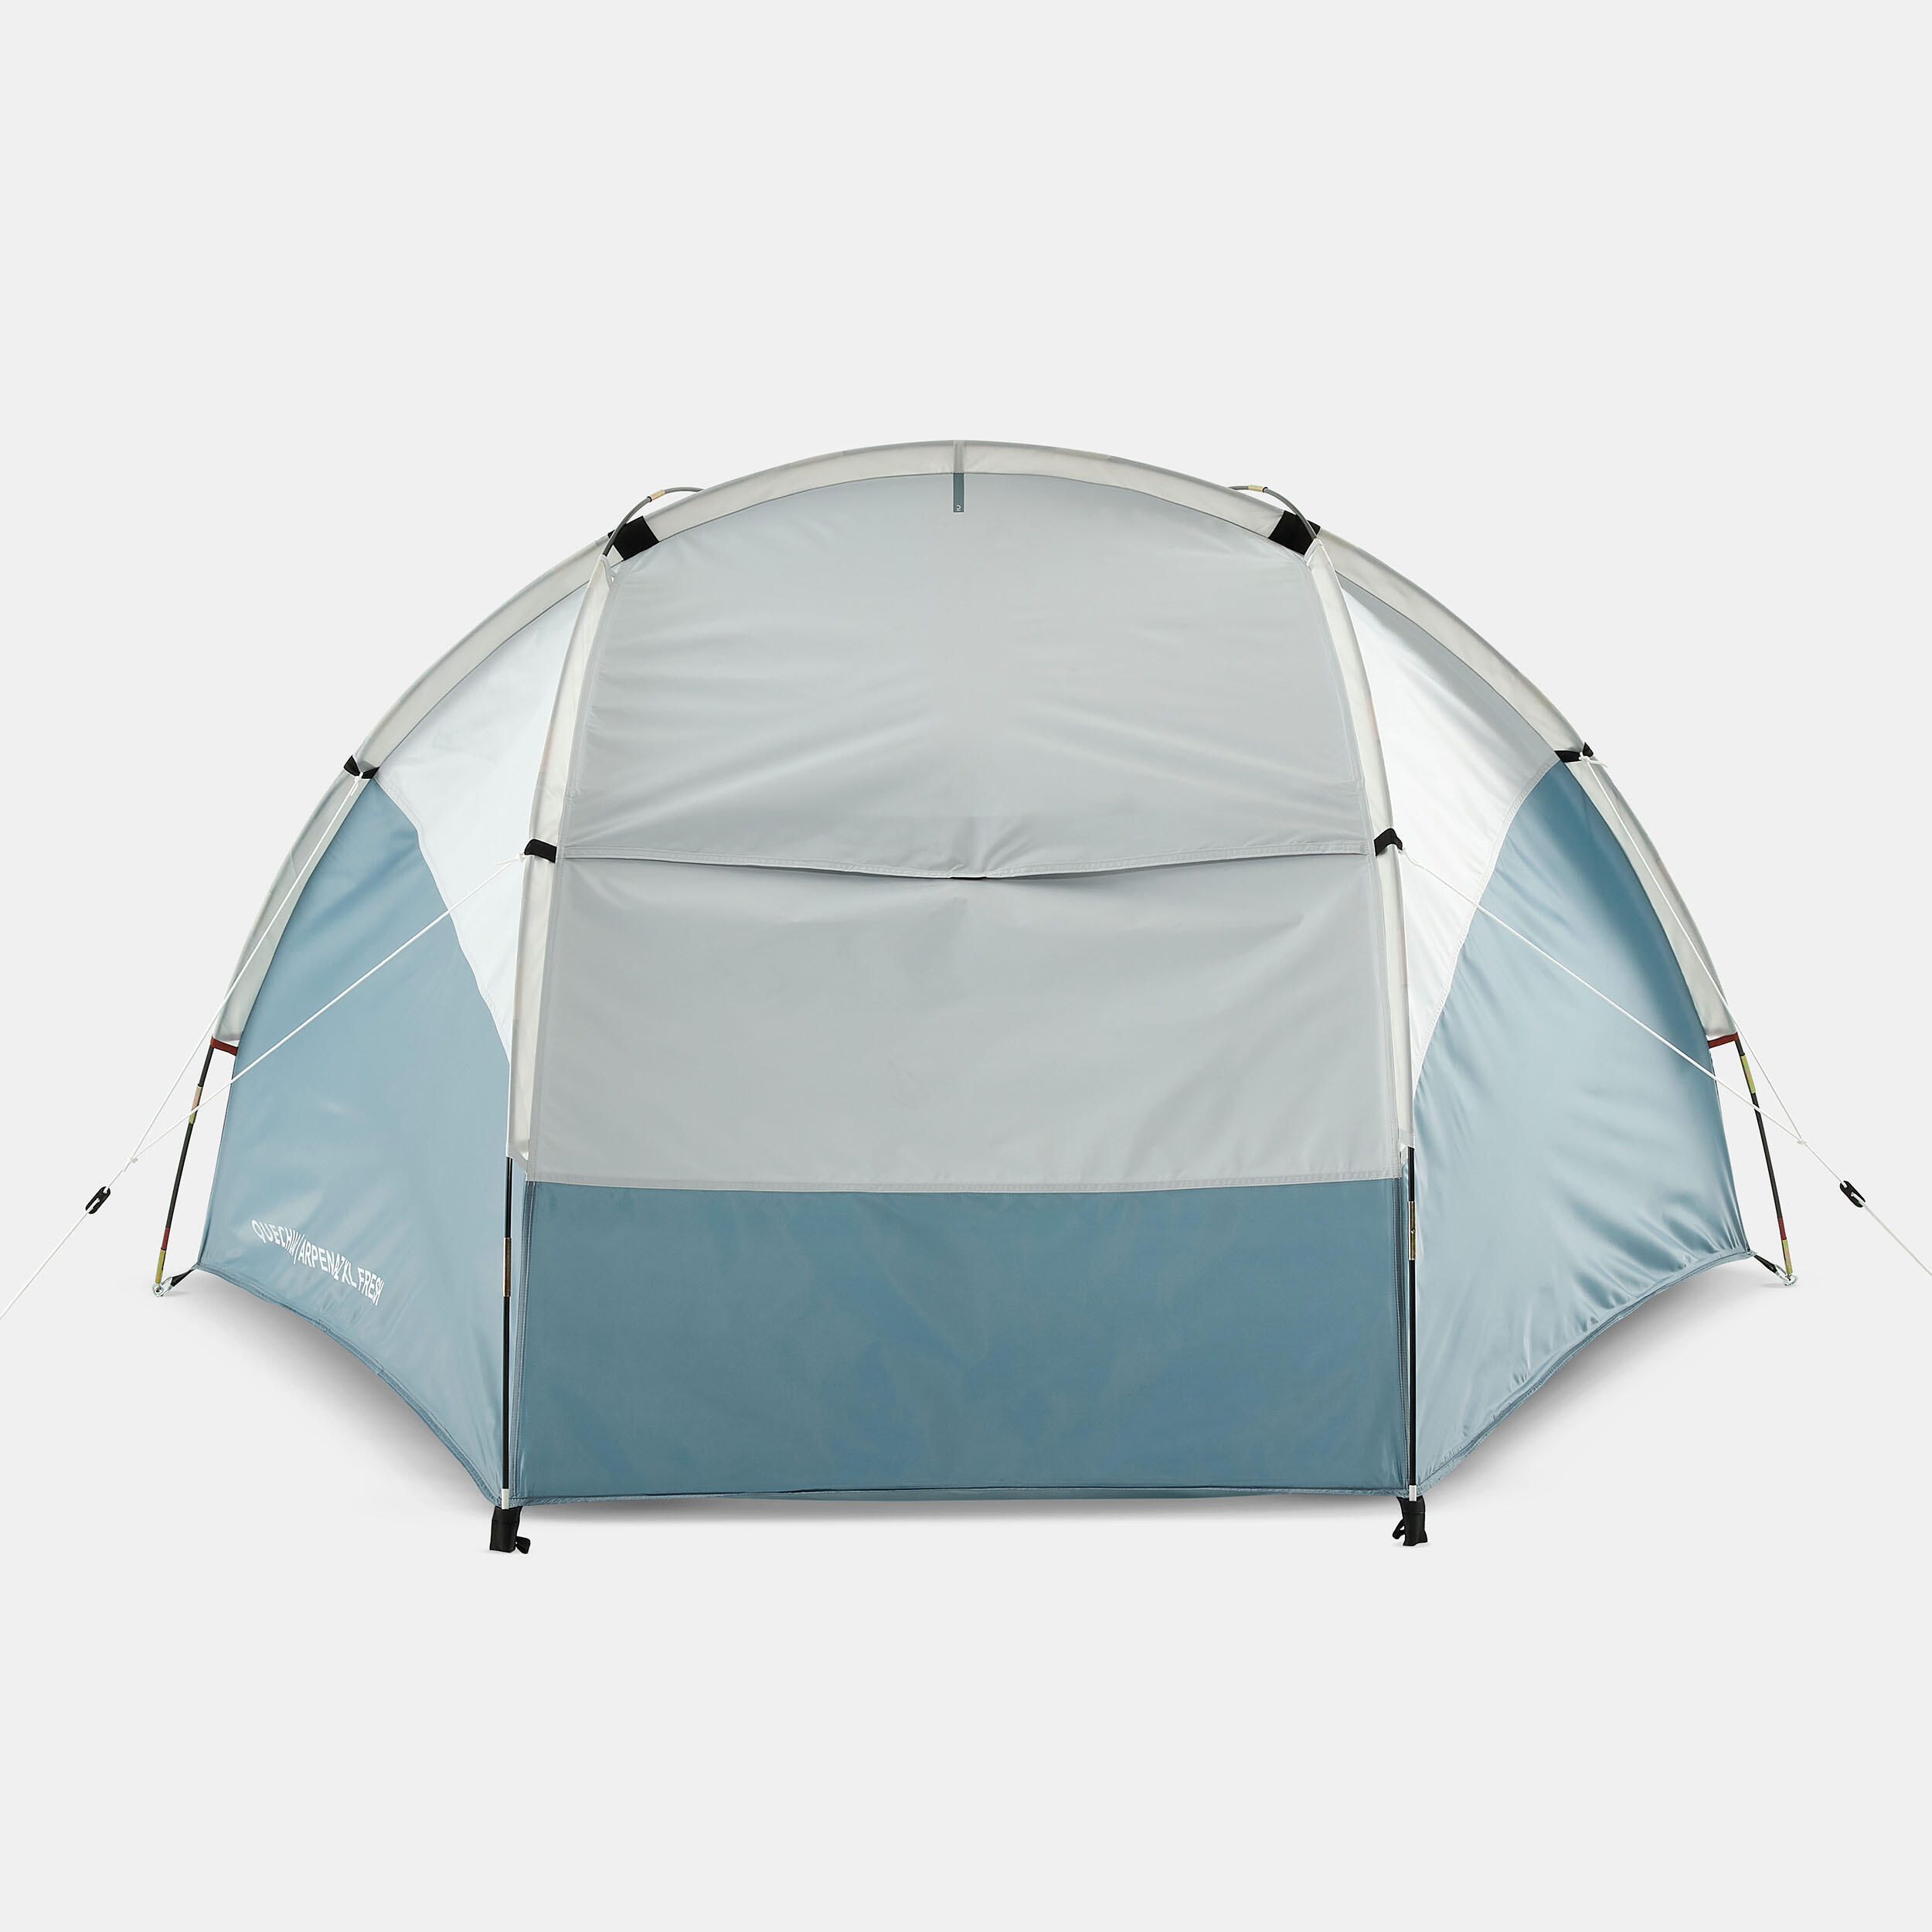 Camping Shelter (with tent poles) Arpenaz 0 XL Fresh Compact 2-Person 6/10